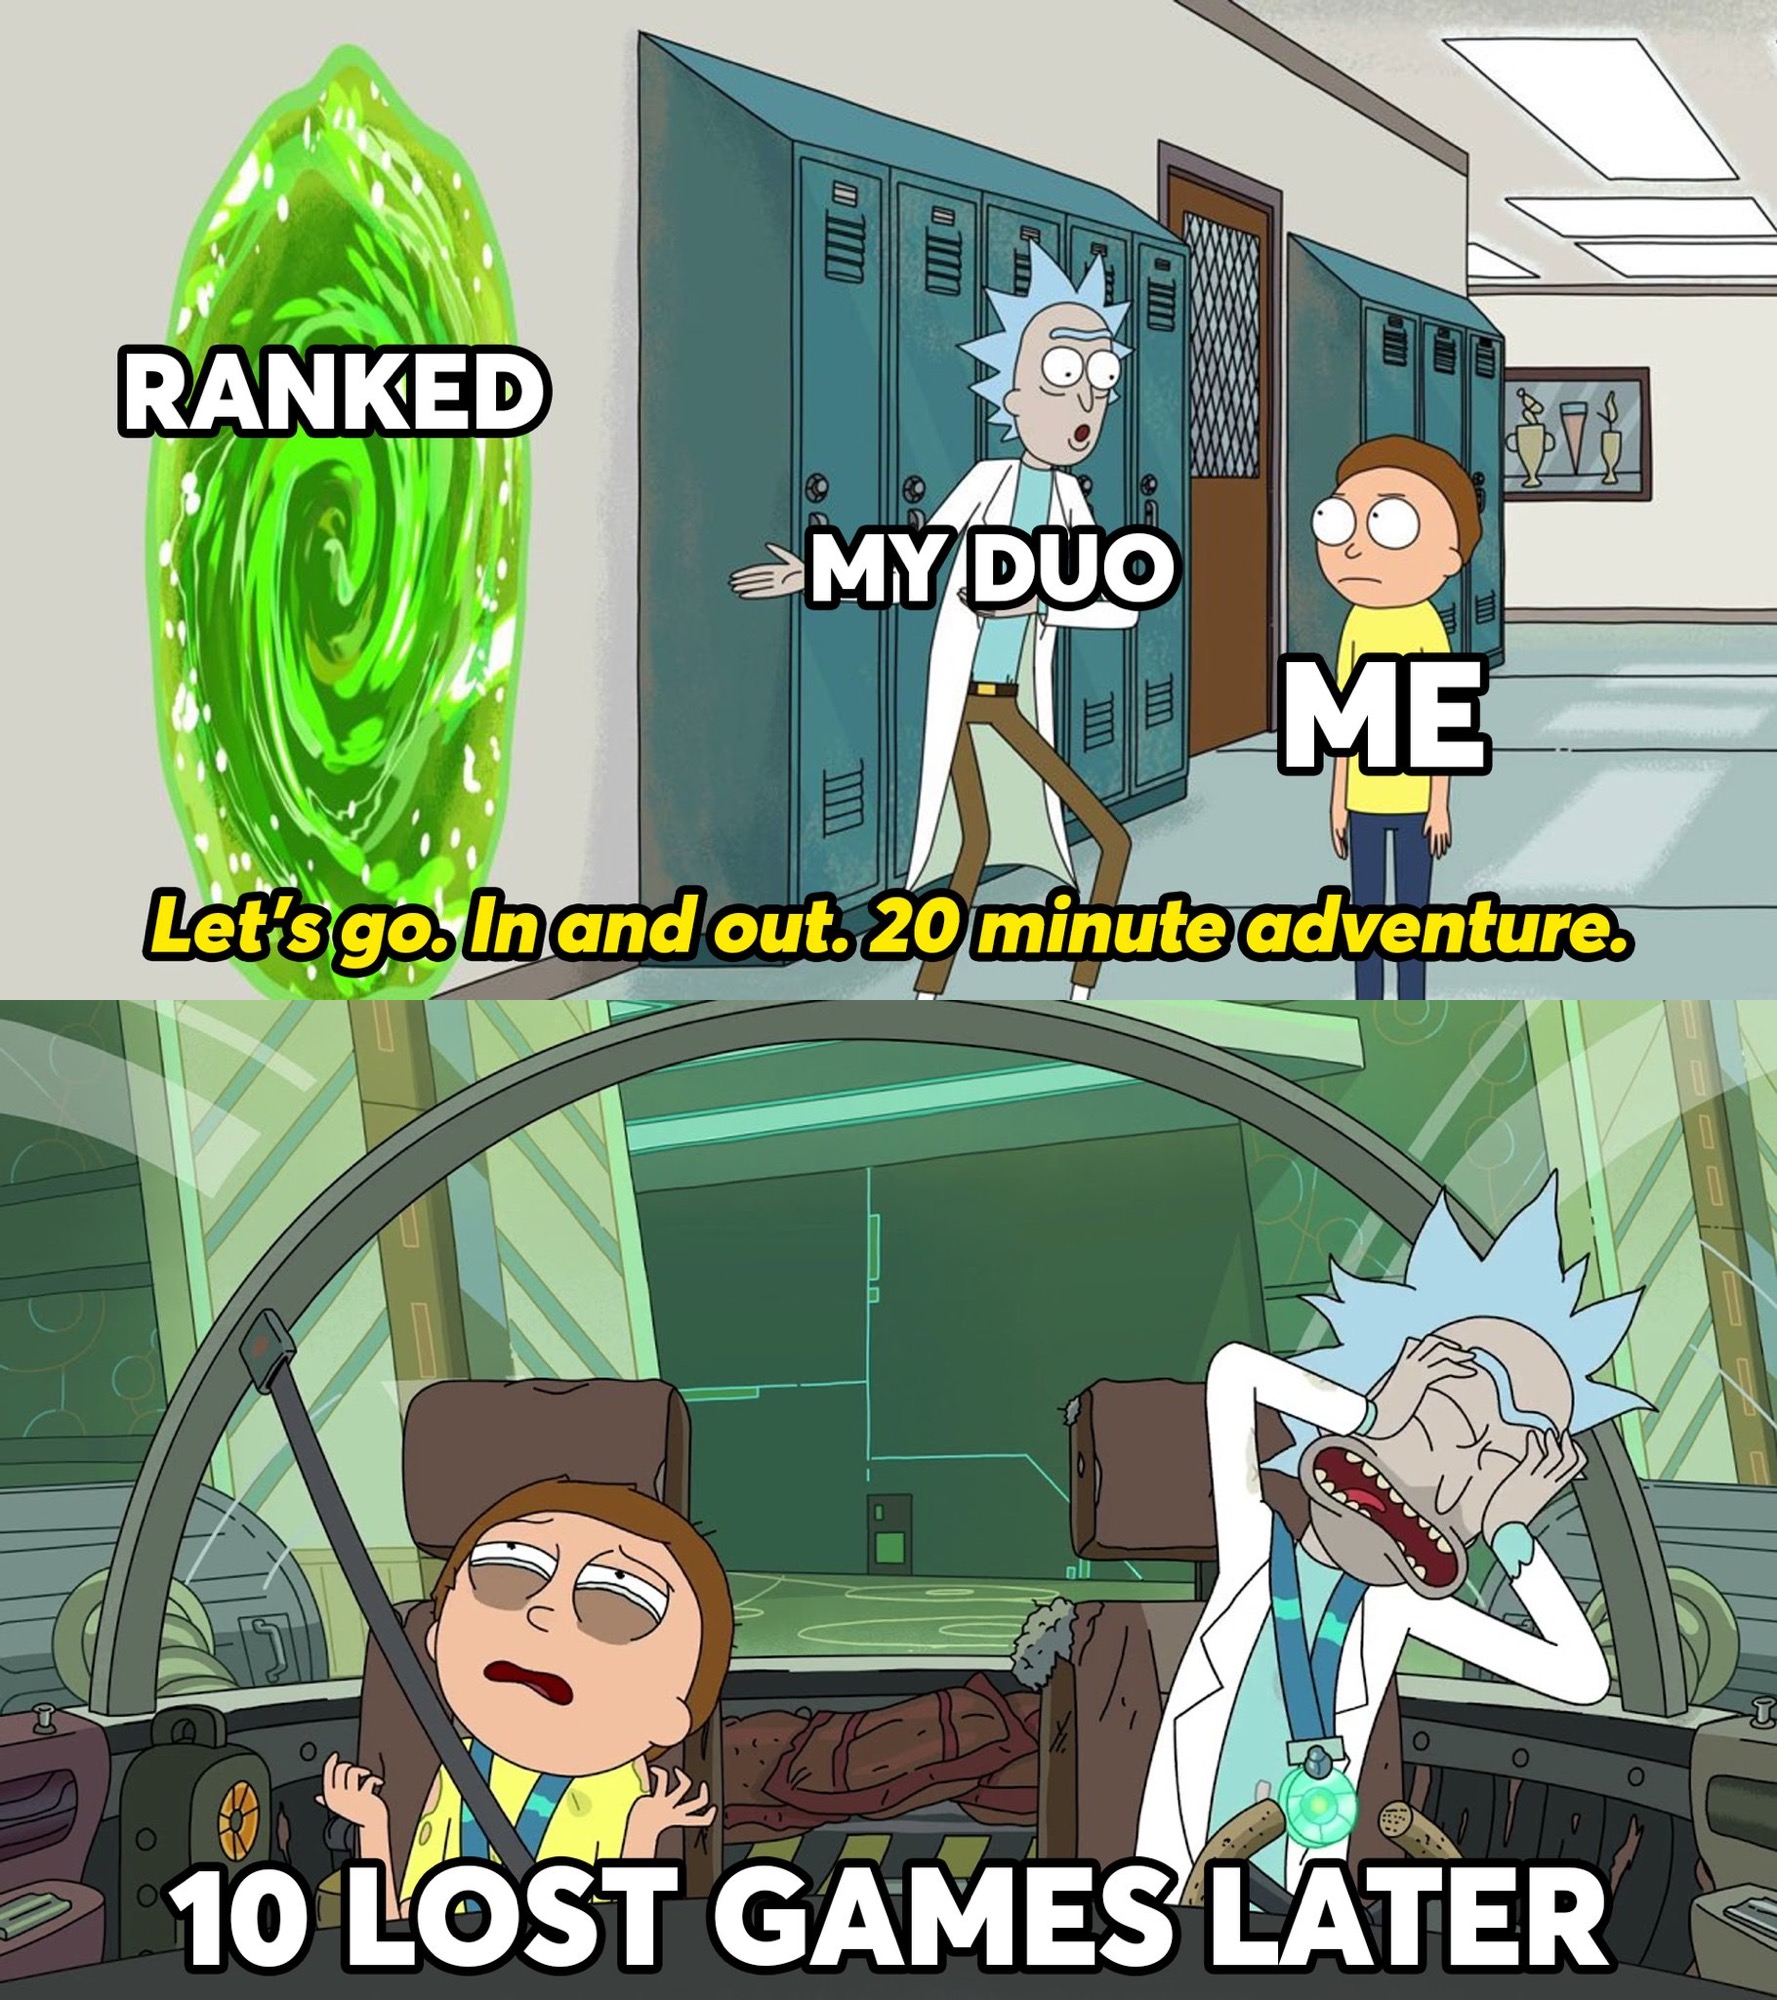 funny memes and pics - returnal hard memes - Ranked Hii My Duo R Me Let's go. In and out. 20 minute adventure. 10 Lost Games Later